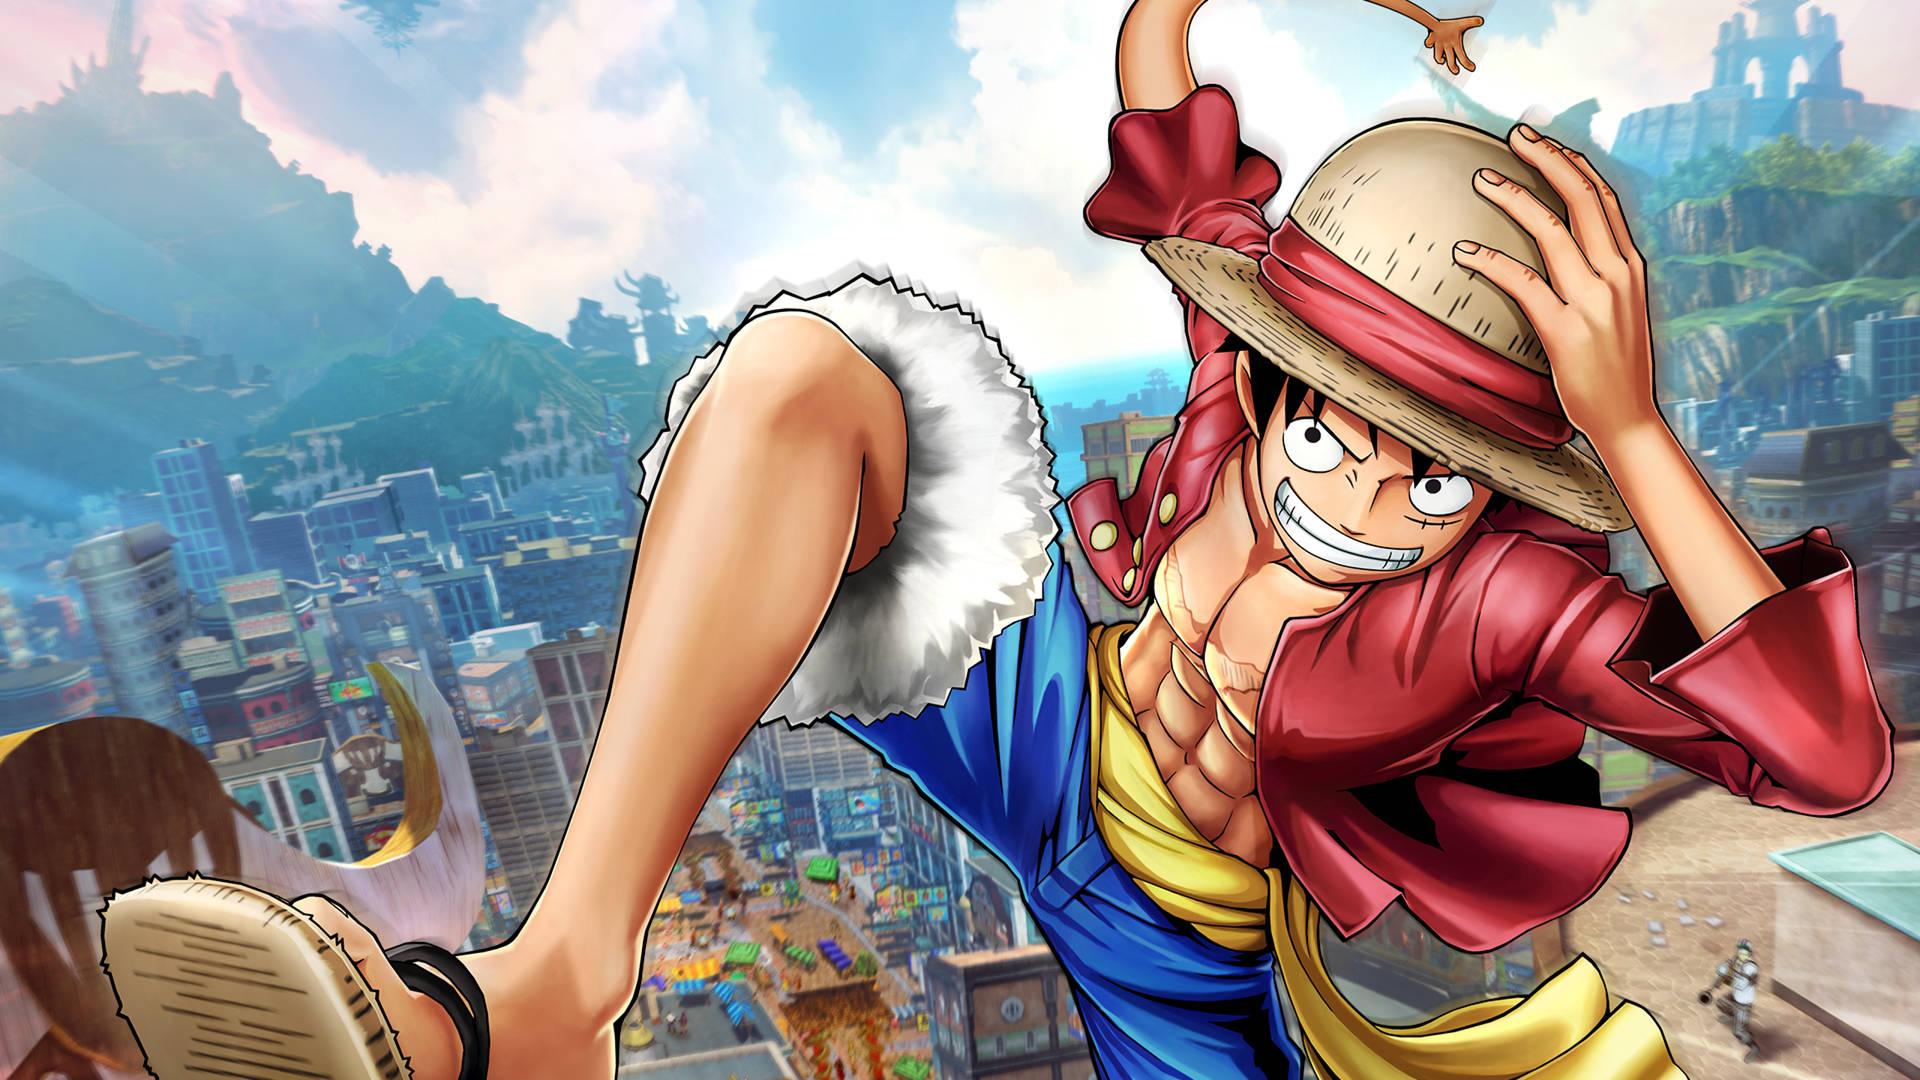 Image Monkey D. Luffy, The Rubber Man Of The Popular Anime Series ‘one Piece’